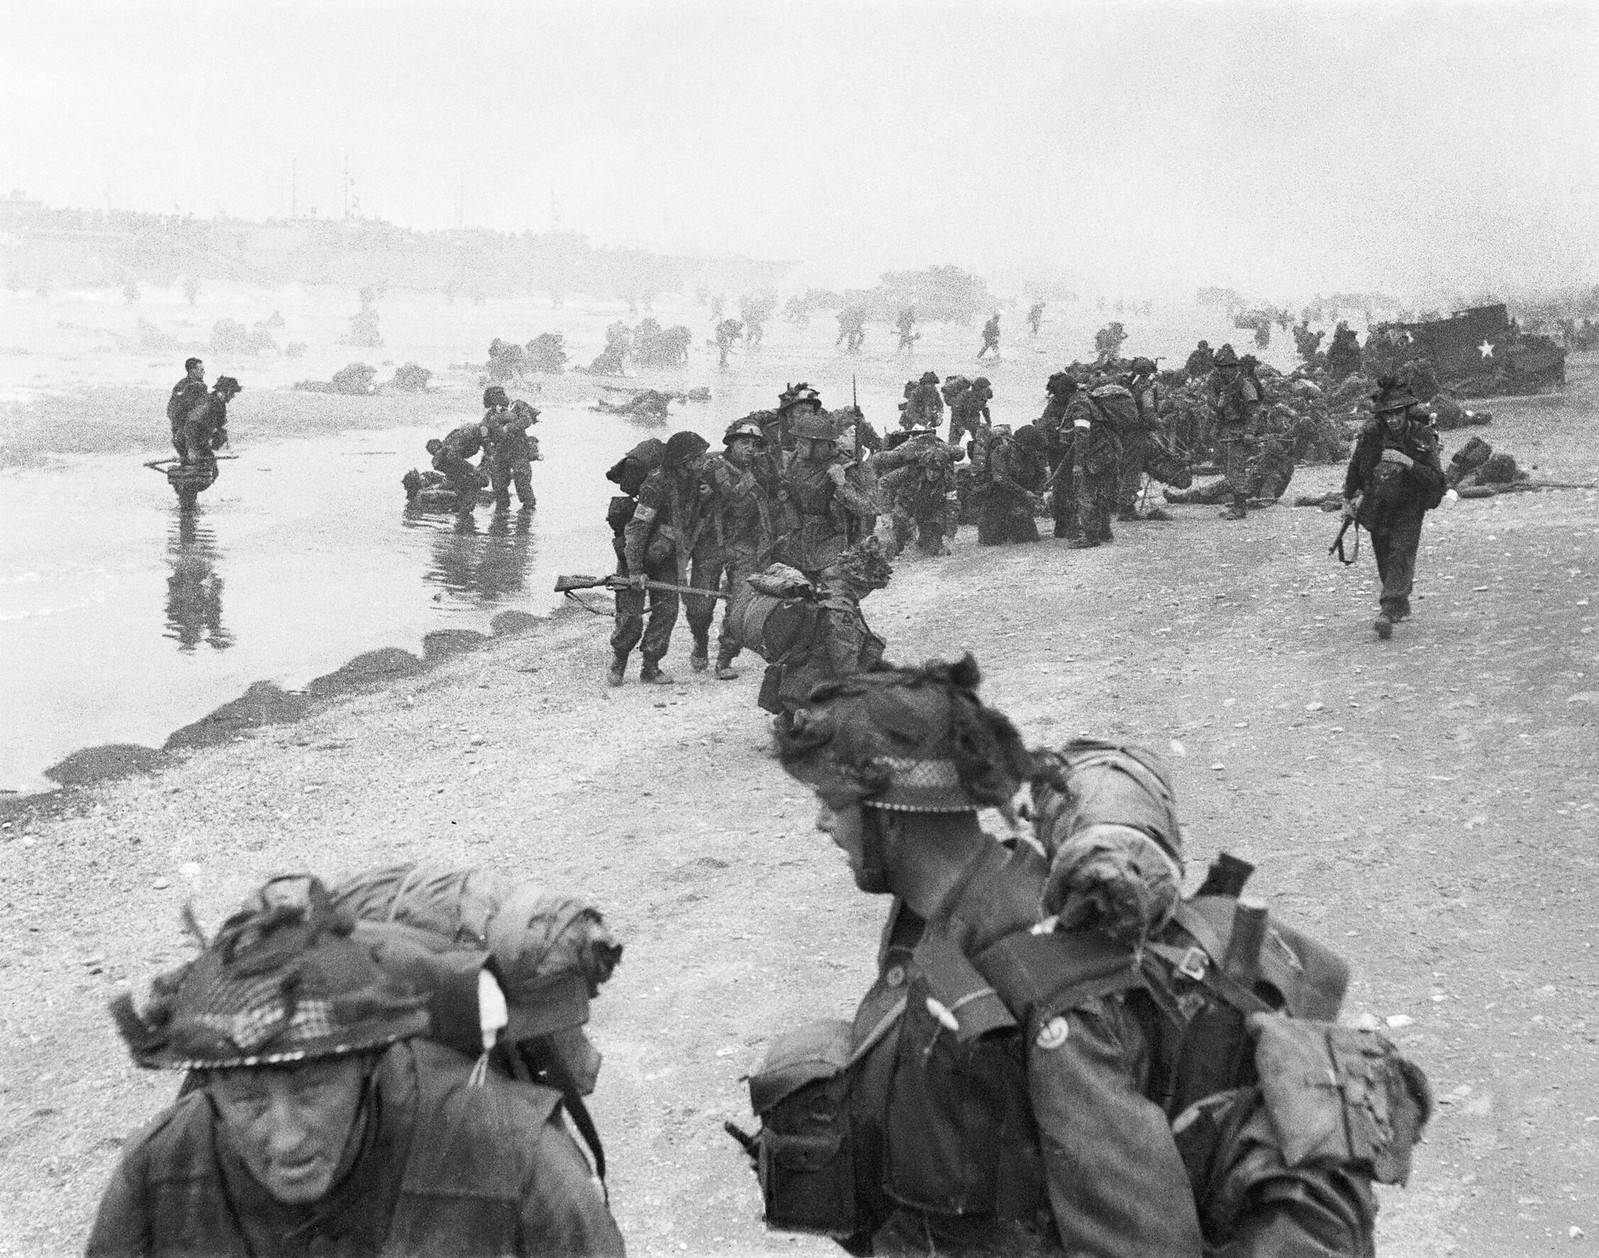 Troops of 3rd Infantry Division on Queen Red beach, Sword area, circa 0845 hrs, 6 June 1944.